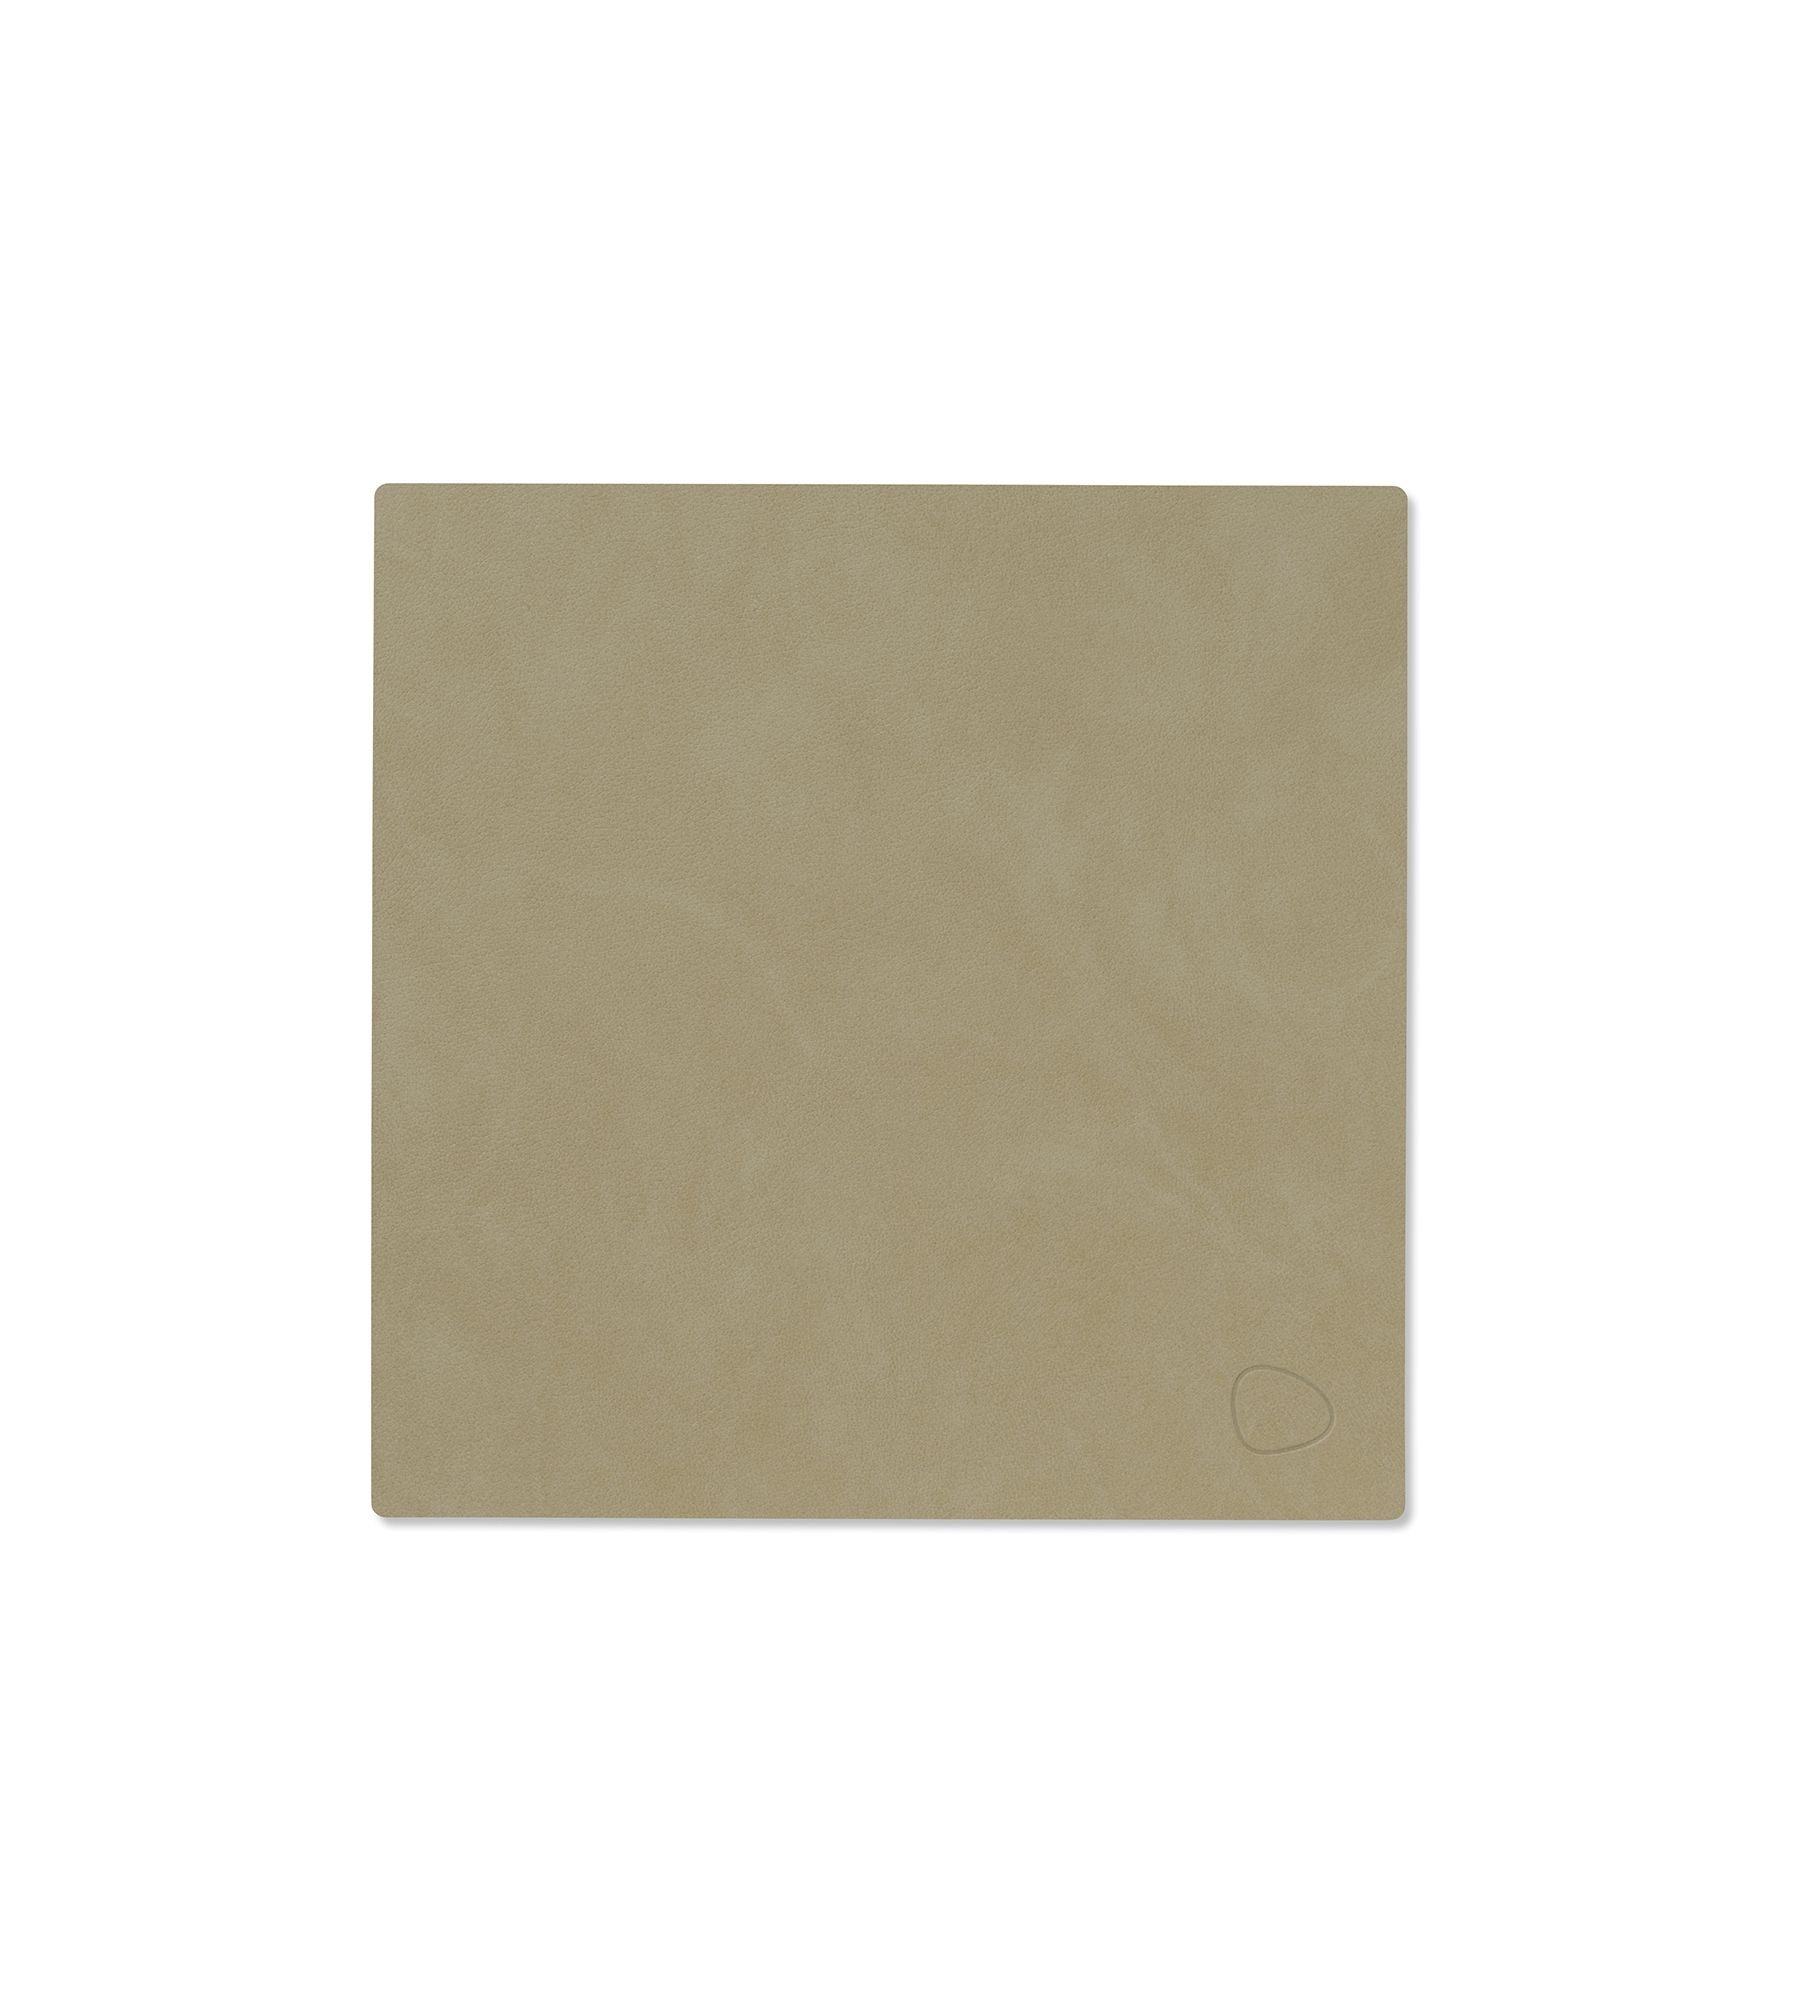 Lind Dna Tableau Mat Square Small, Herbal Dust